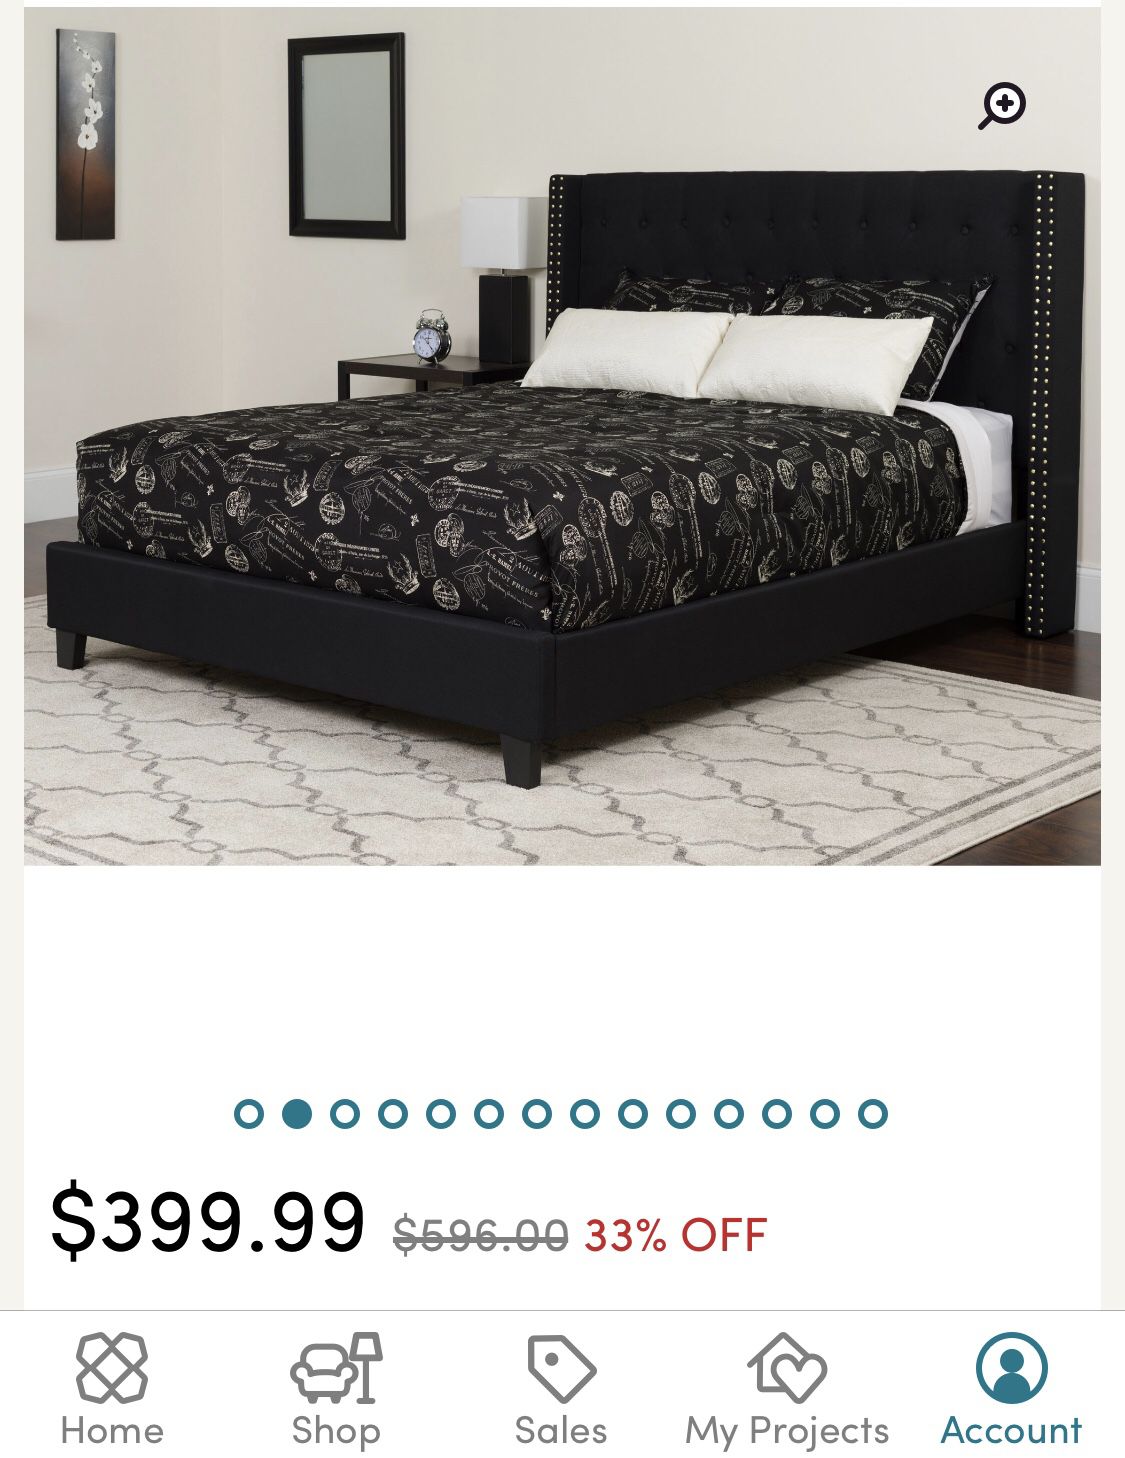 New queen size bed frame